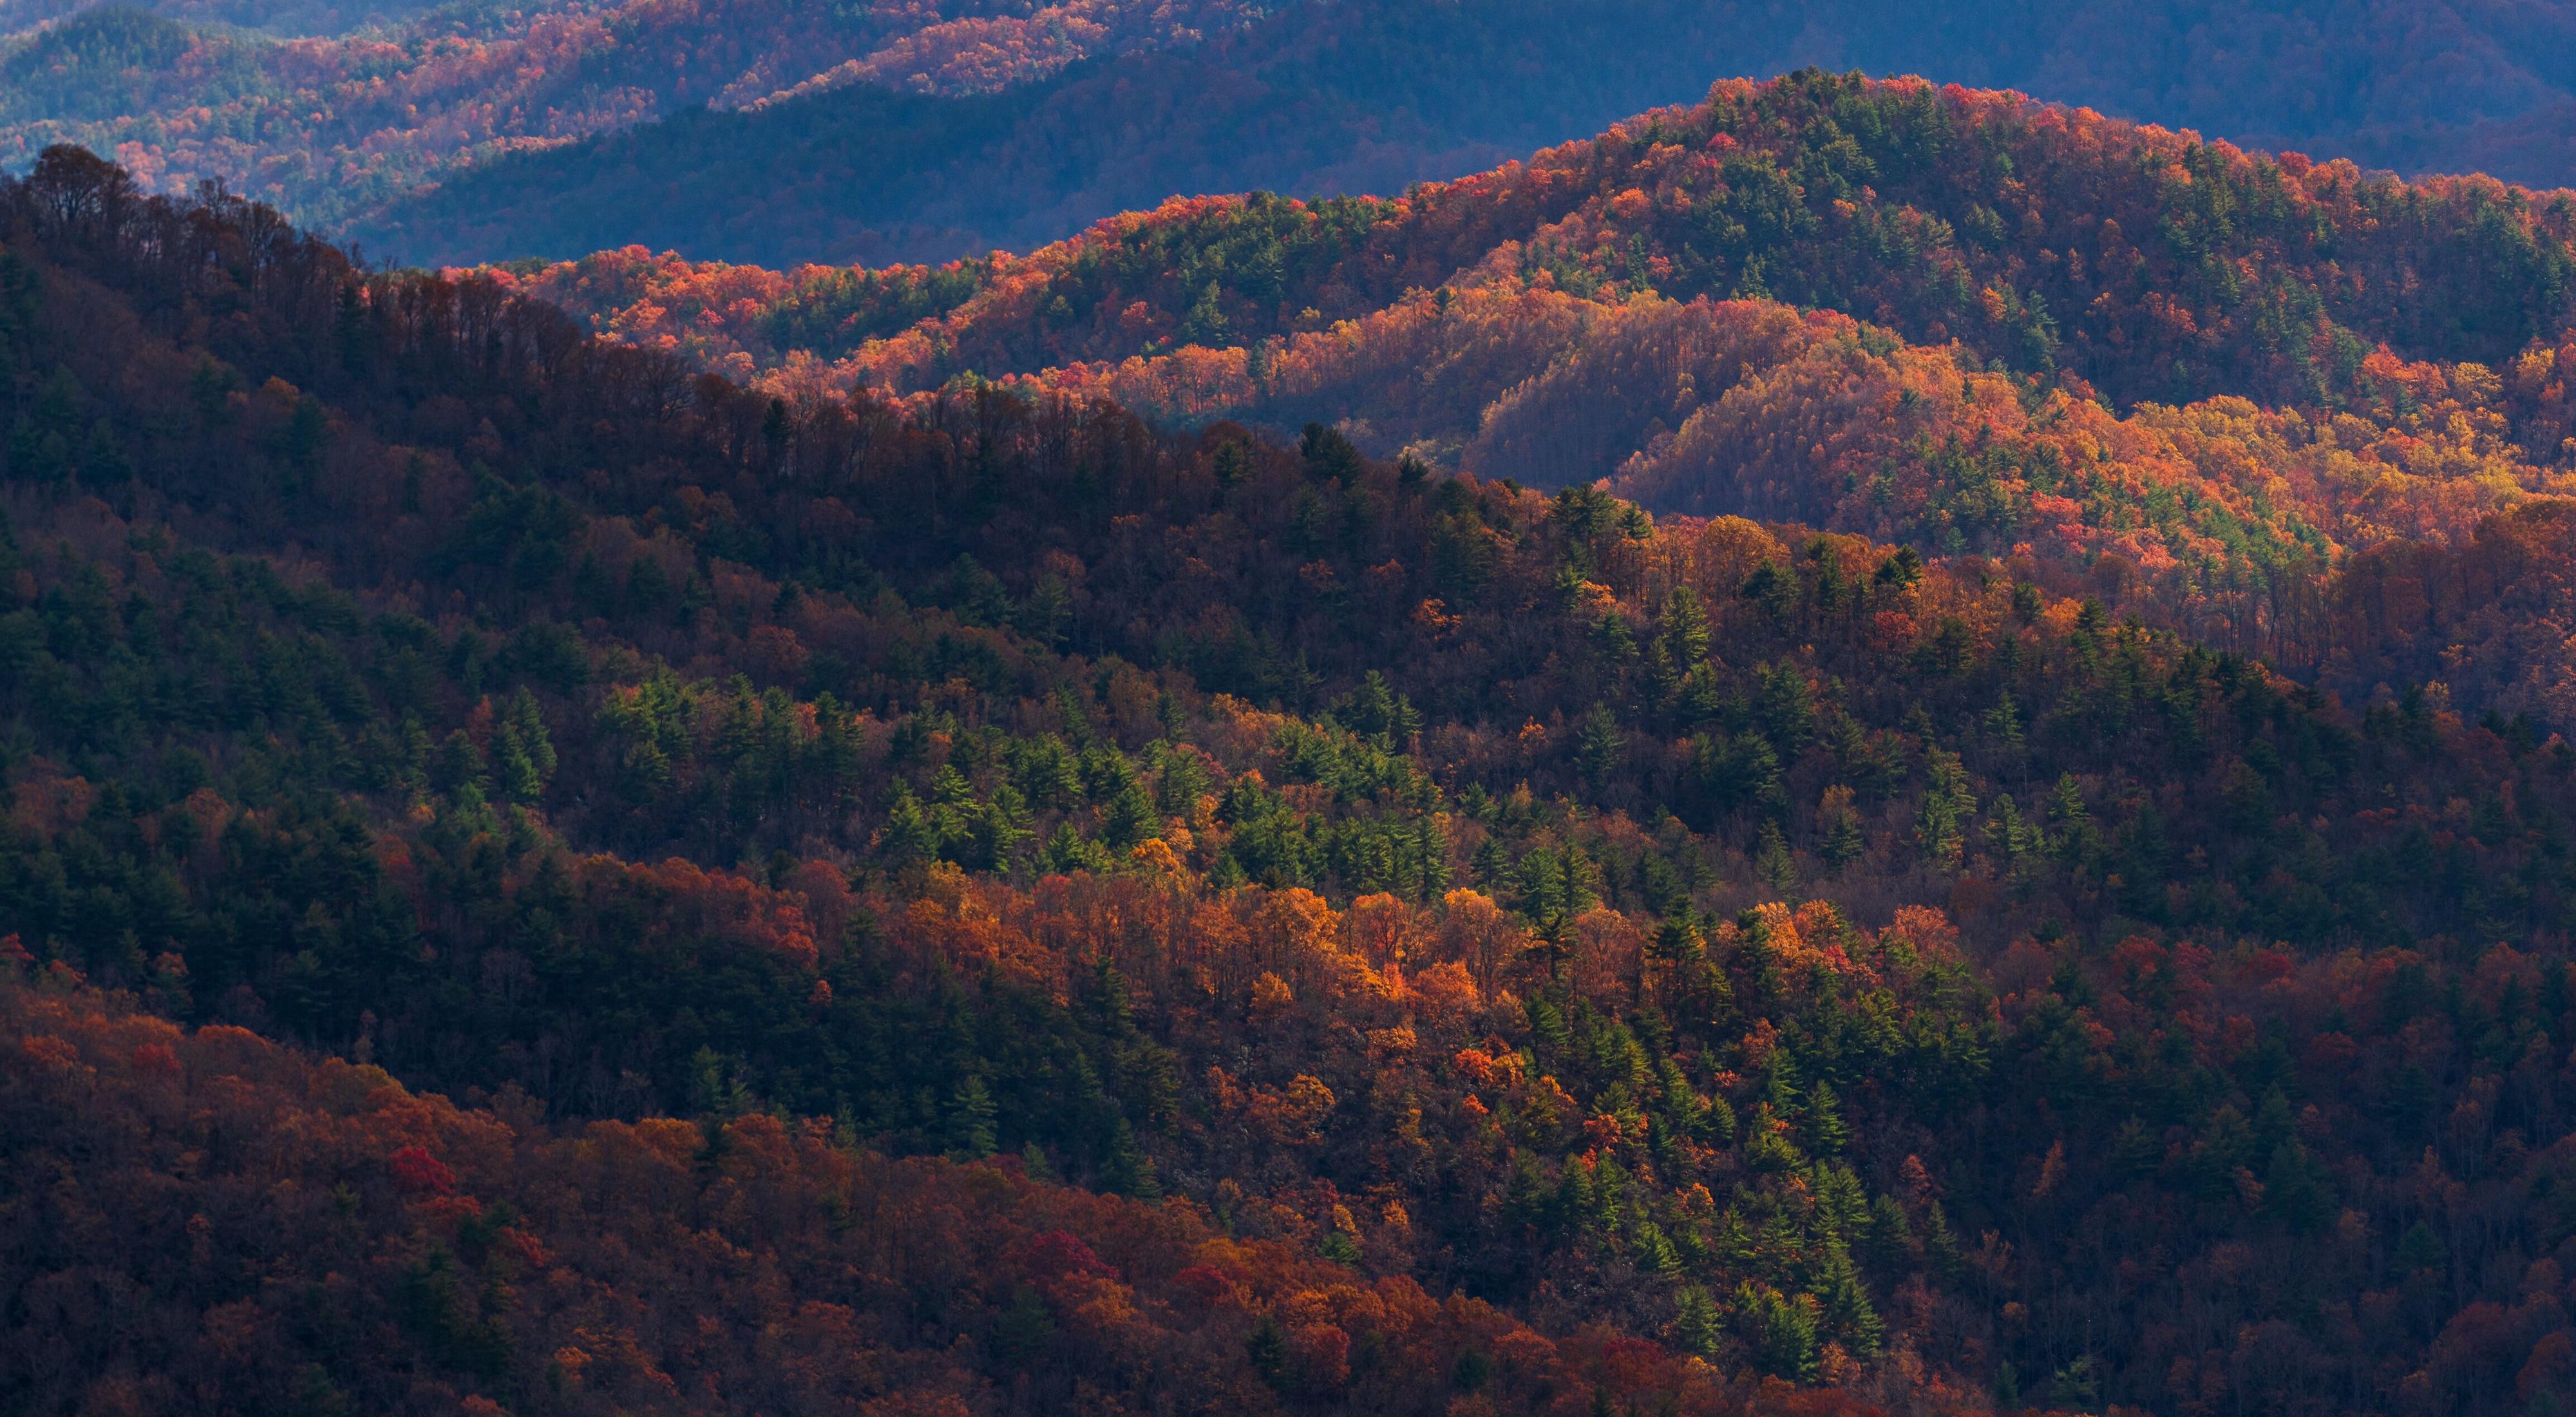 Photo of forests, mountains and hills in the Blue Ridge Mountains of North Carolina, all in fall color.